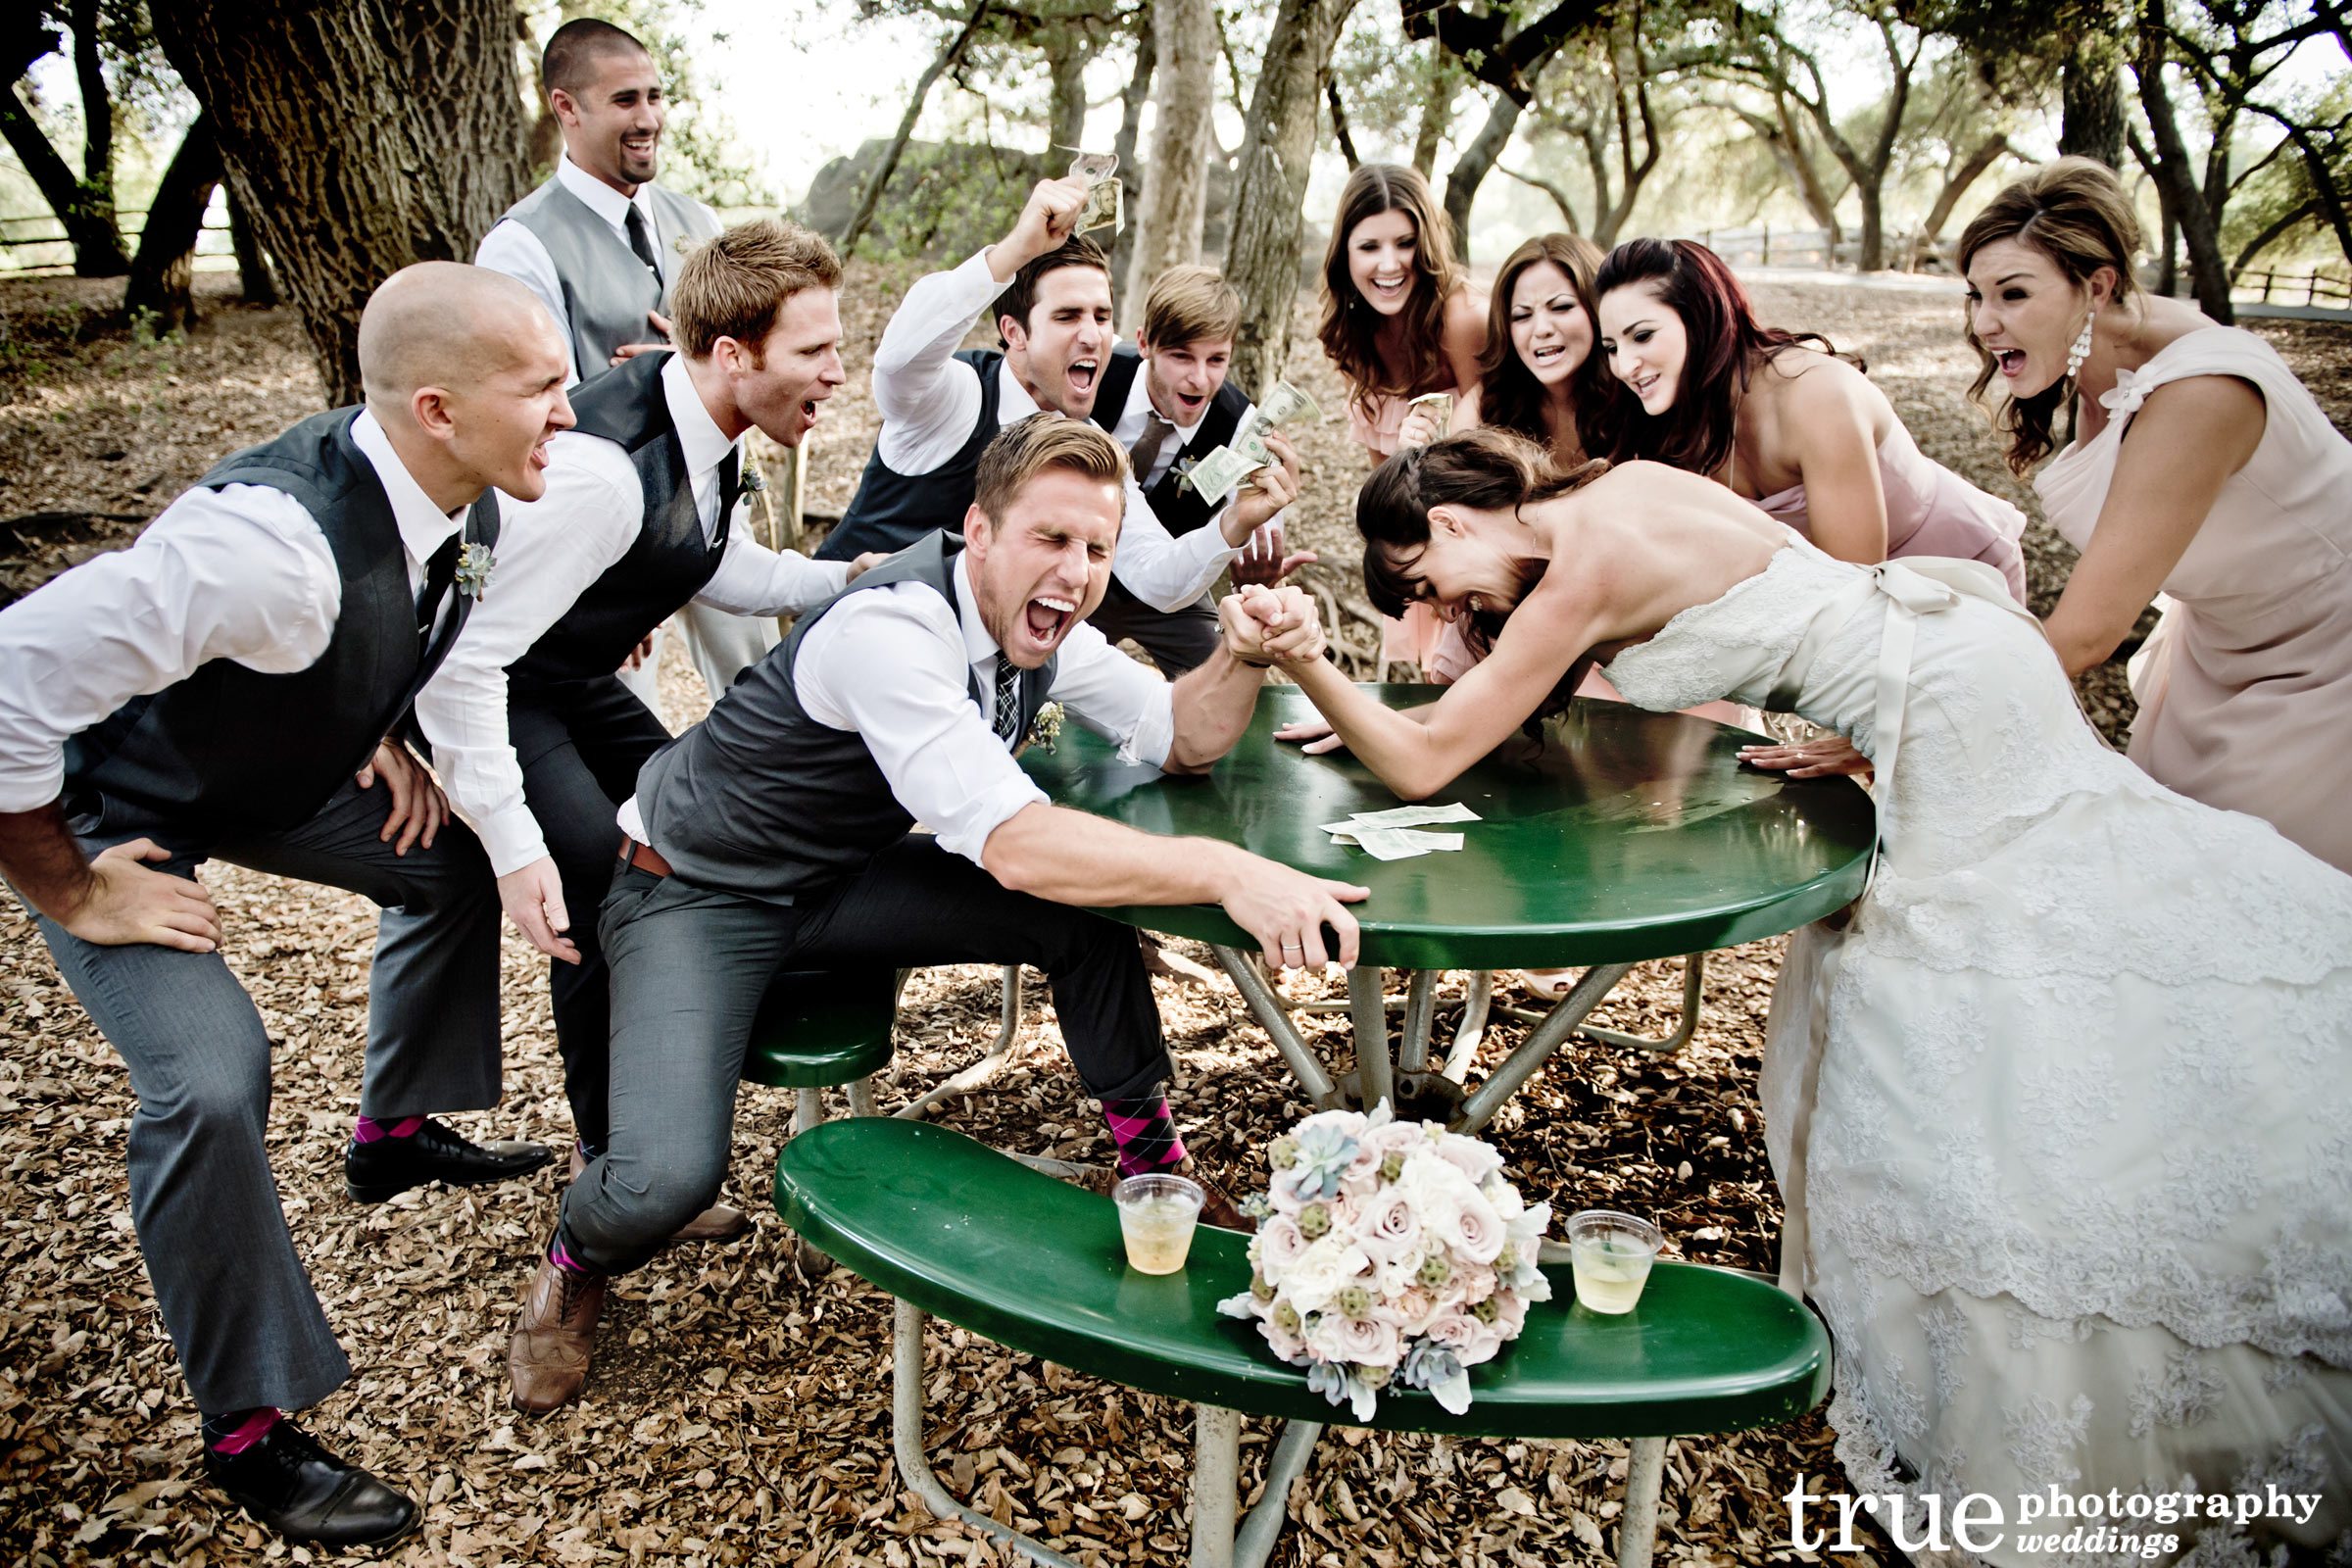 10 Wedding Party Photos You Should Take on Your Wedding Day!